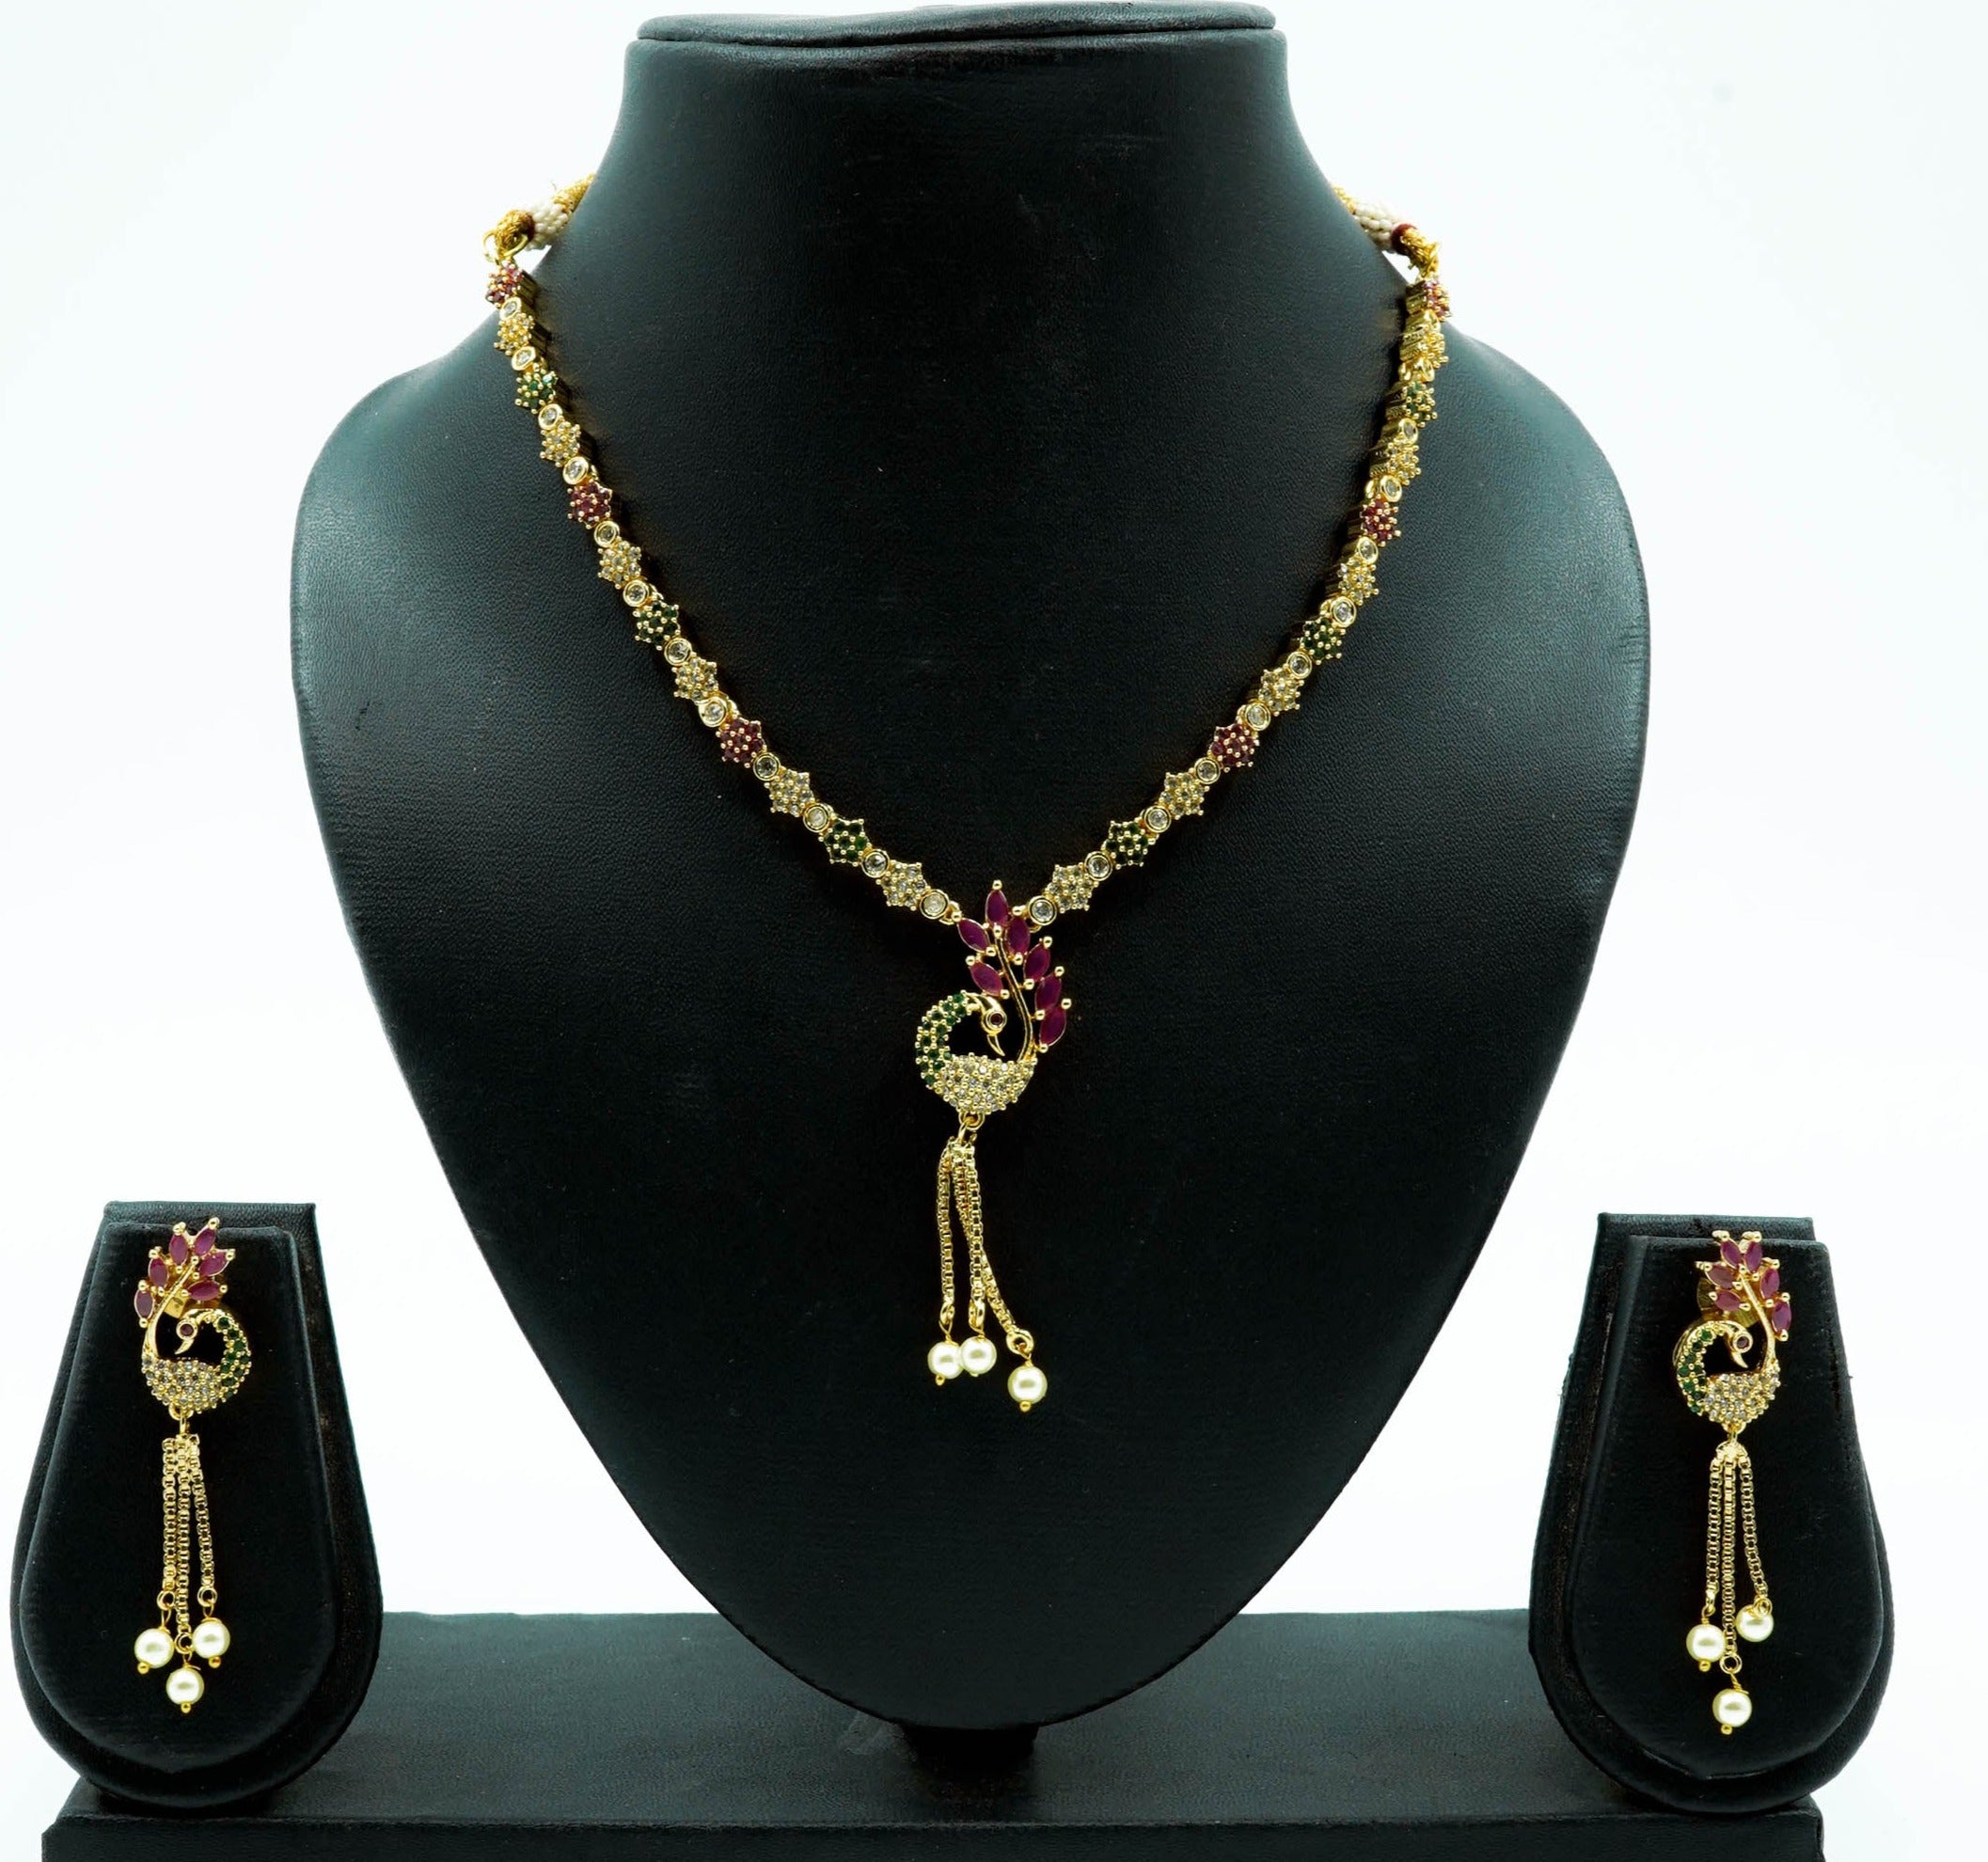 Premium Quality Micro Gold finish Necklace set with High Quality AD Stones Peacock 9513N